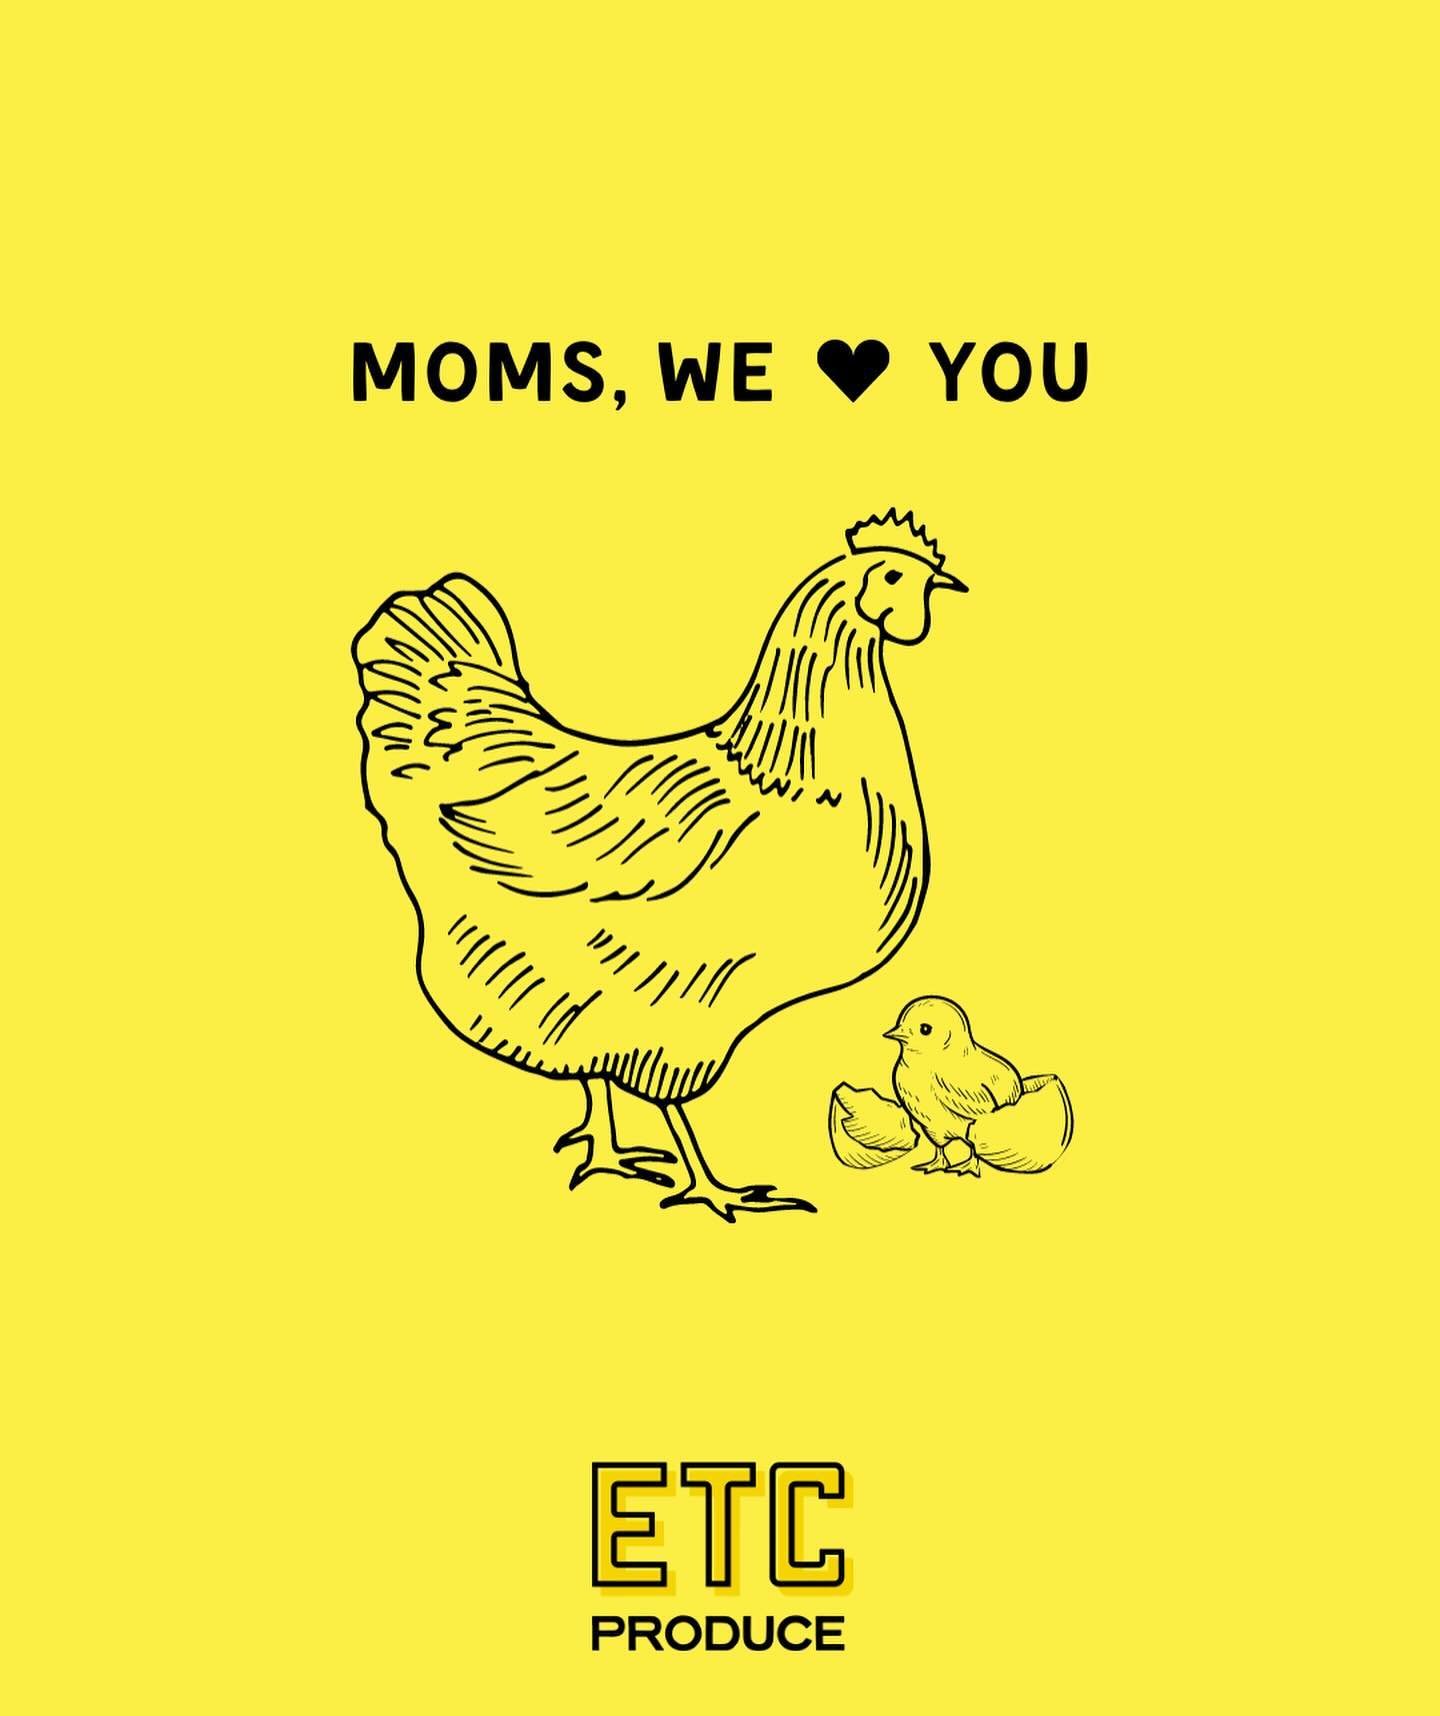 This Mother&rsquo;s Day, celebrate mom with brunch, lunch, or whatever she desires with local supplies from ETC! We&rsquo;ve got the essentials available in-store + online for delivery through Friday💞
Swipe for just a few brunch basics to make her f